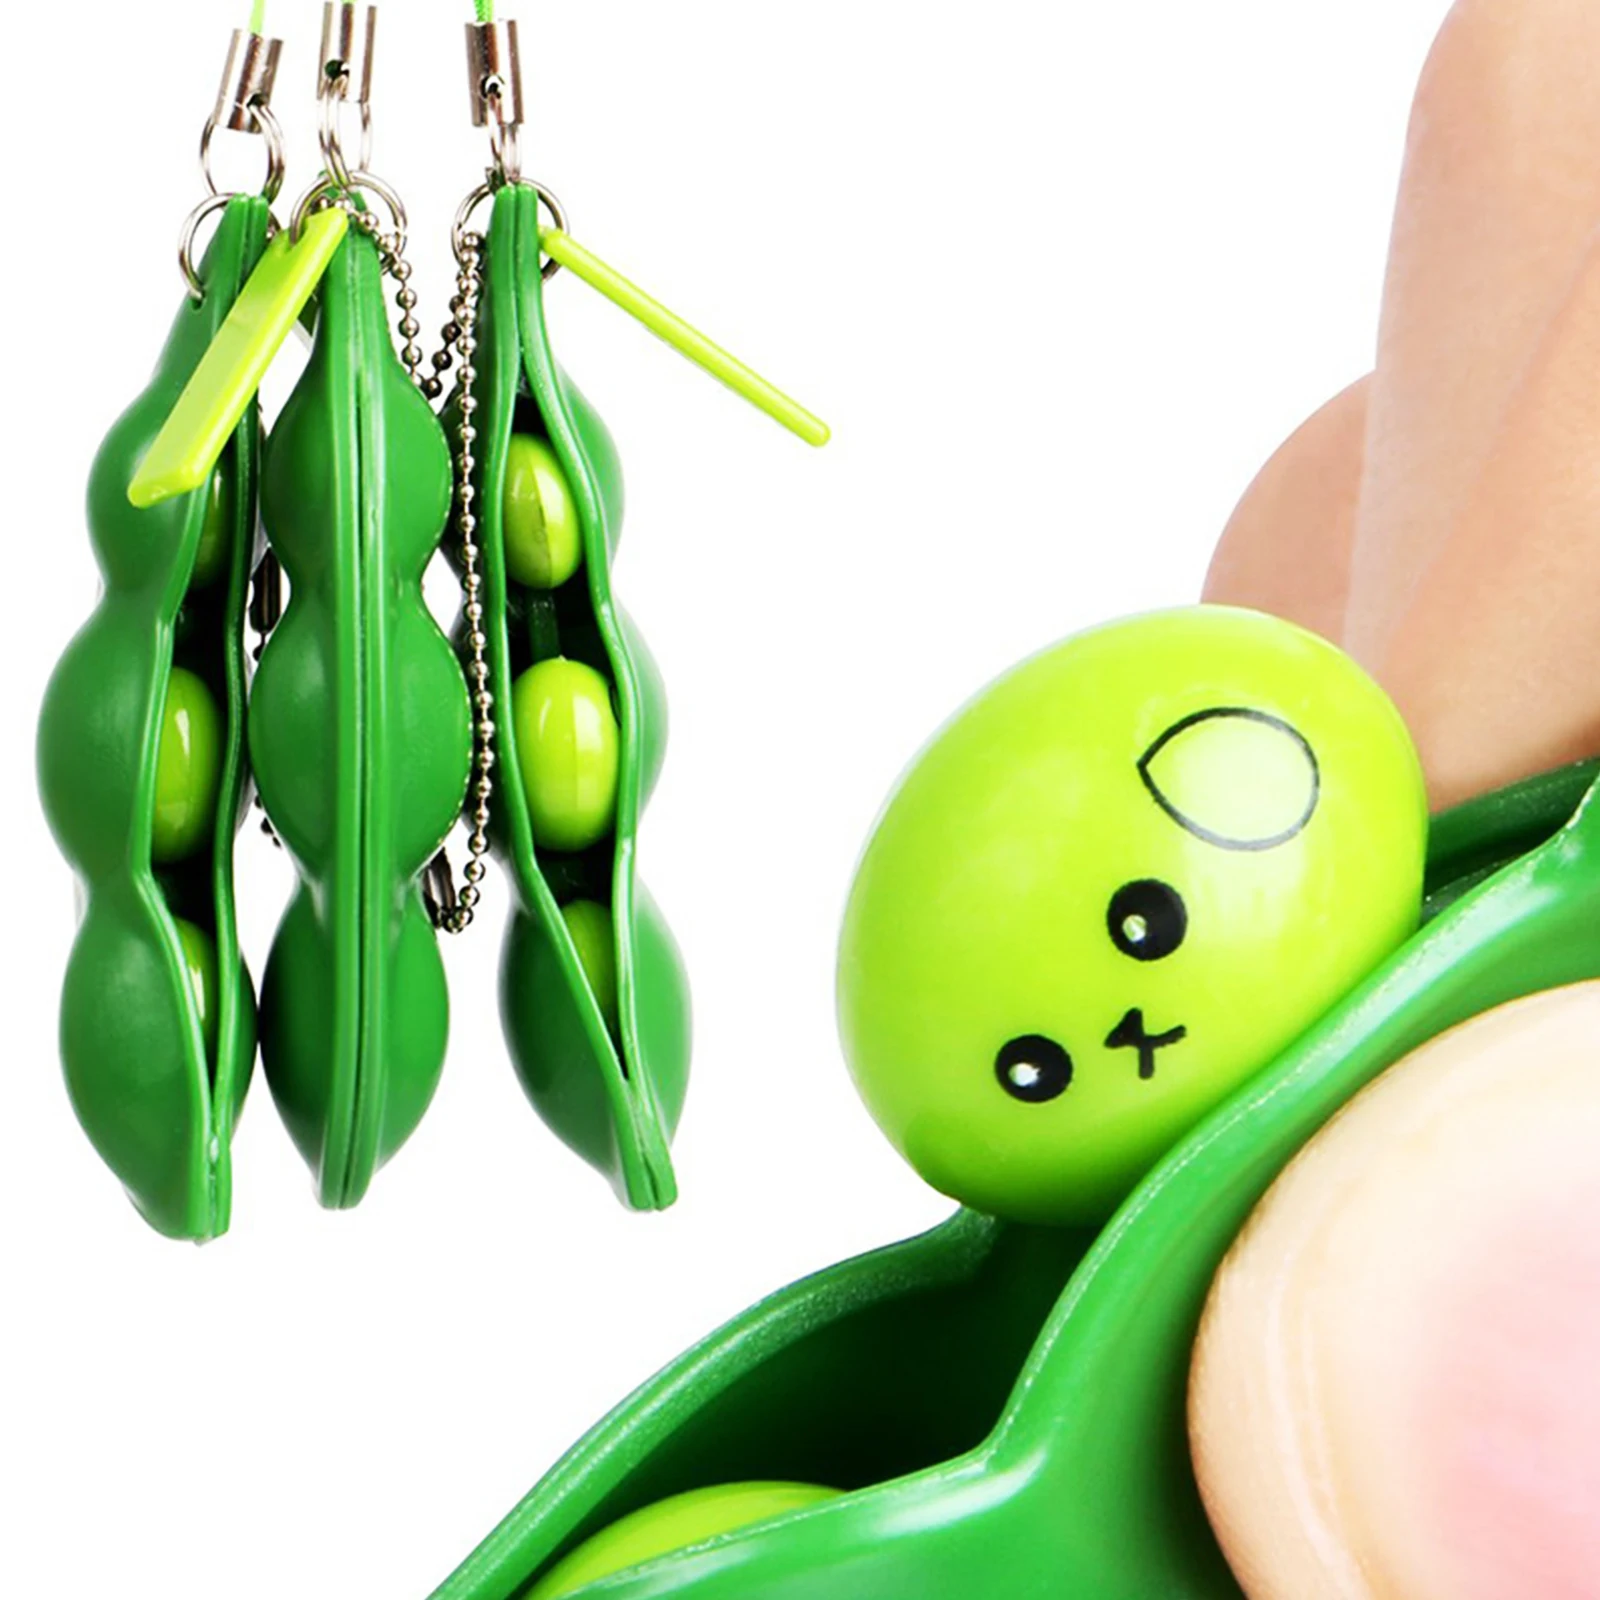 

New Creative Extrusion Pea Bean Soybean Edamame Stress Relieve Toy Keychain Cute Fun Key Chain Ring Paty Gift Bag Charms Trinket